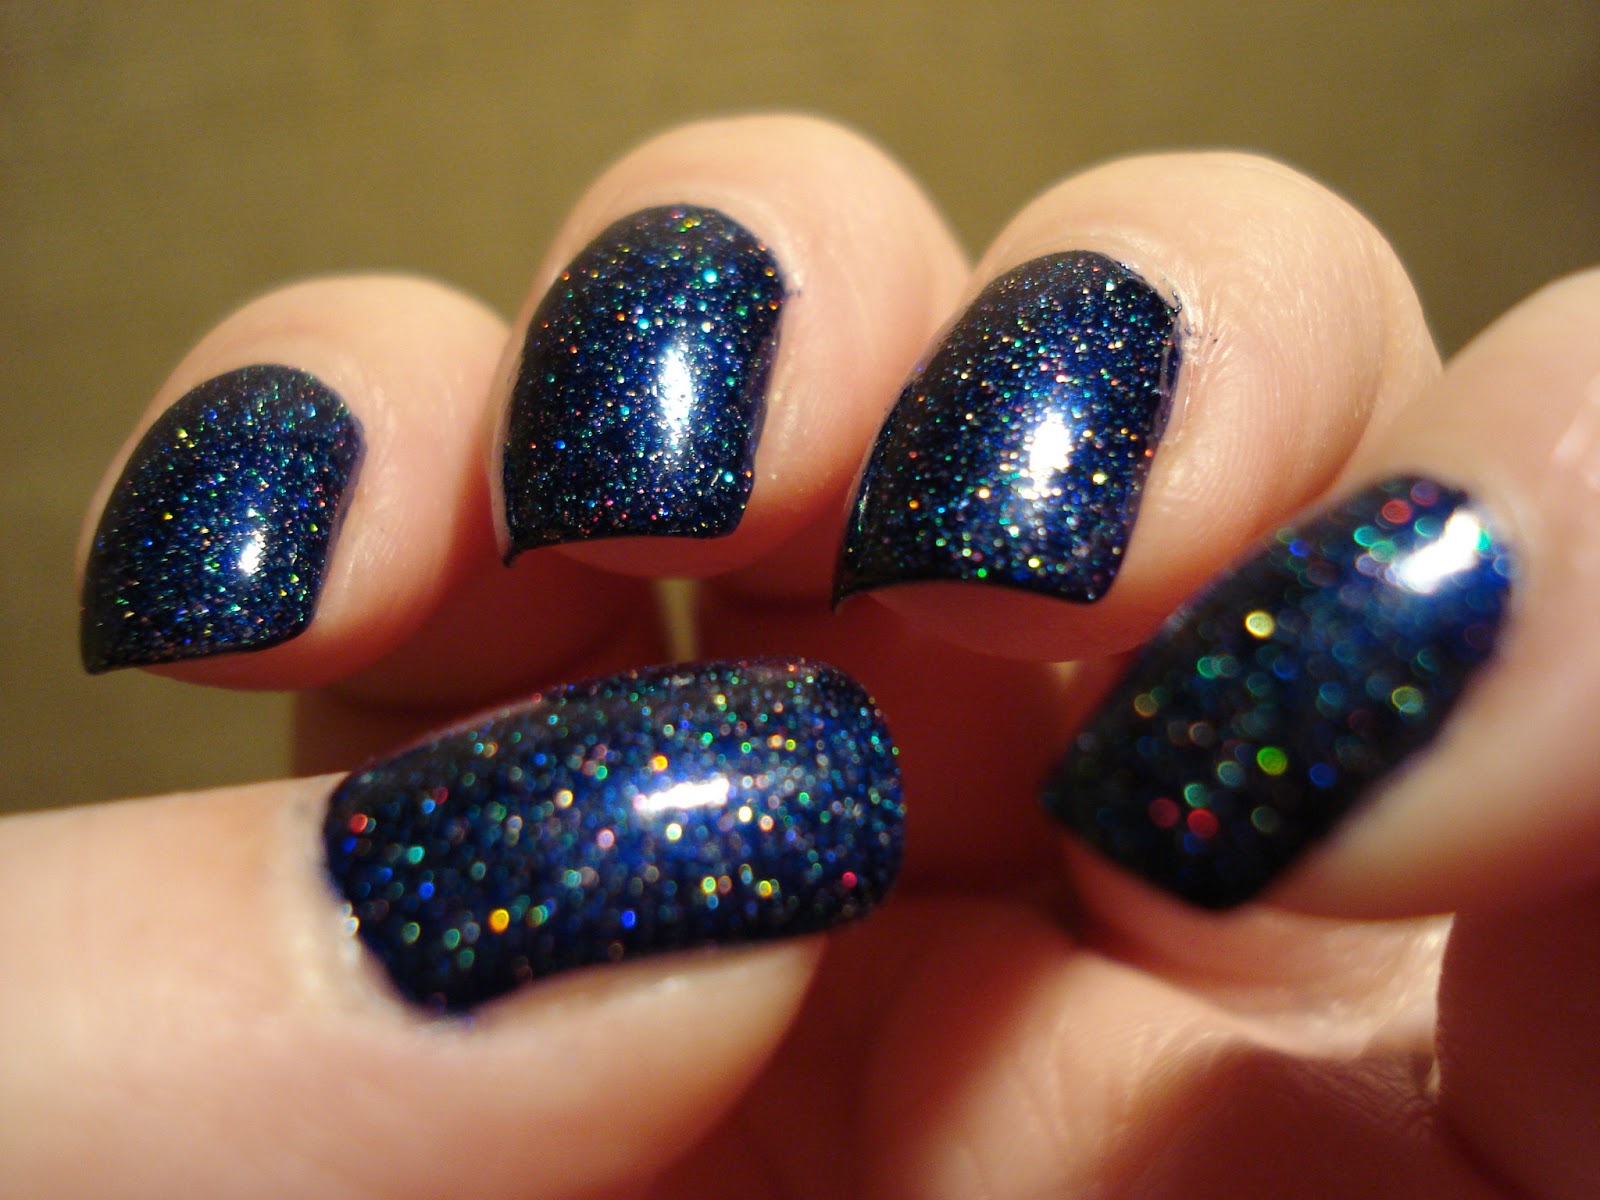 Little Miss Nailpolish: Pupa M234 Blue Holo - swatches and review